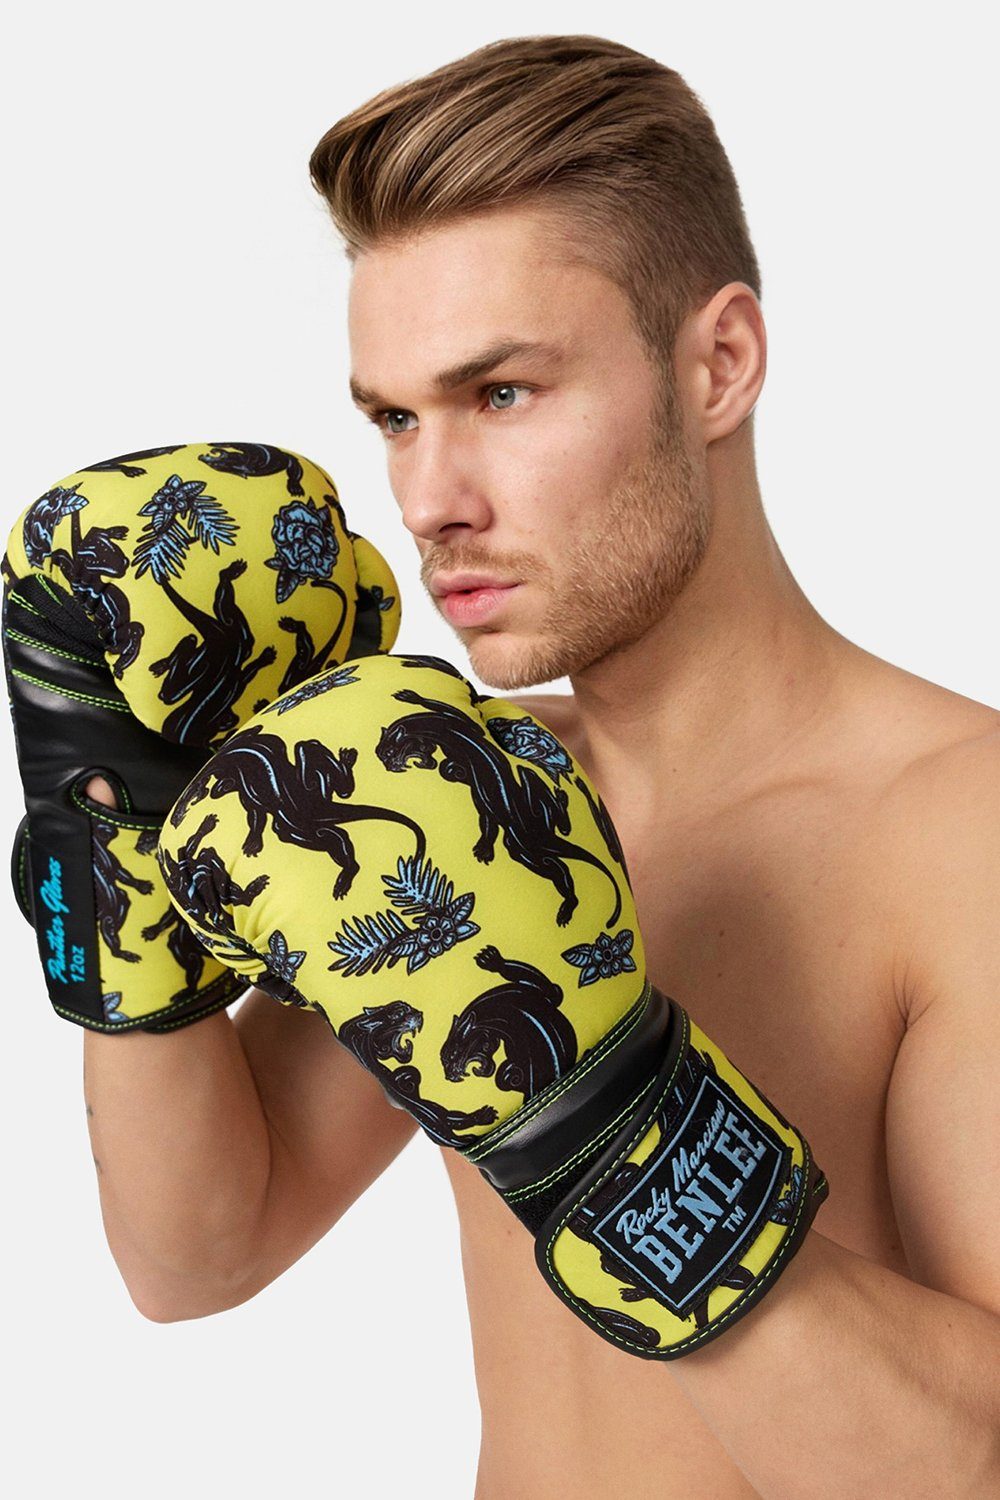 Benlee Rocky Marciano GLOVES PANTHER Boxhandschuhe